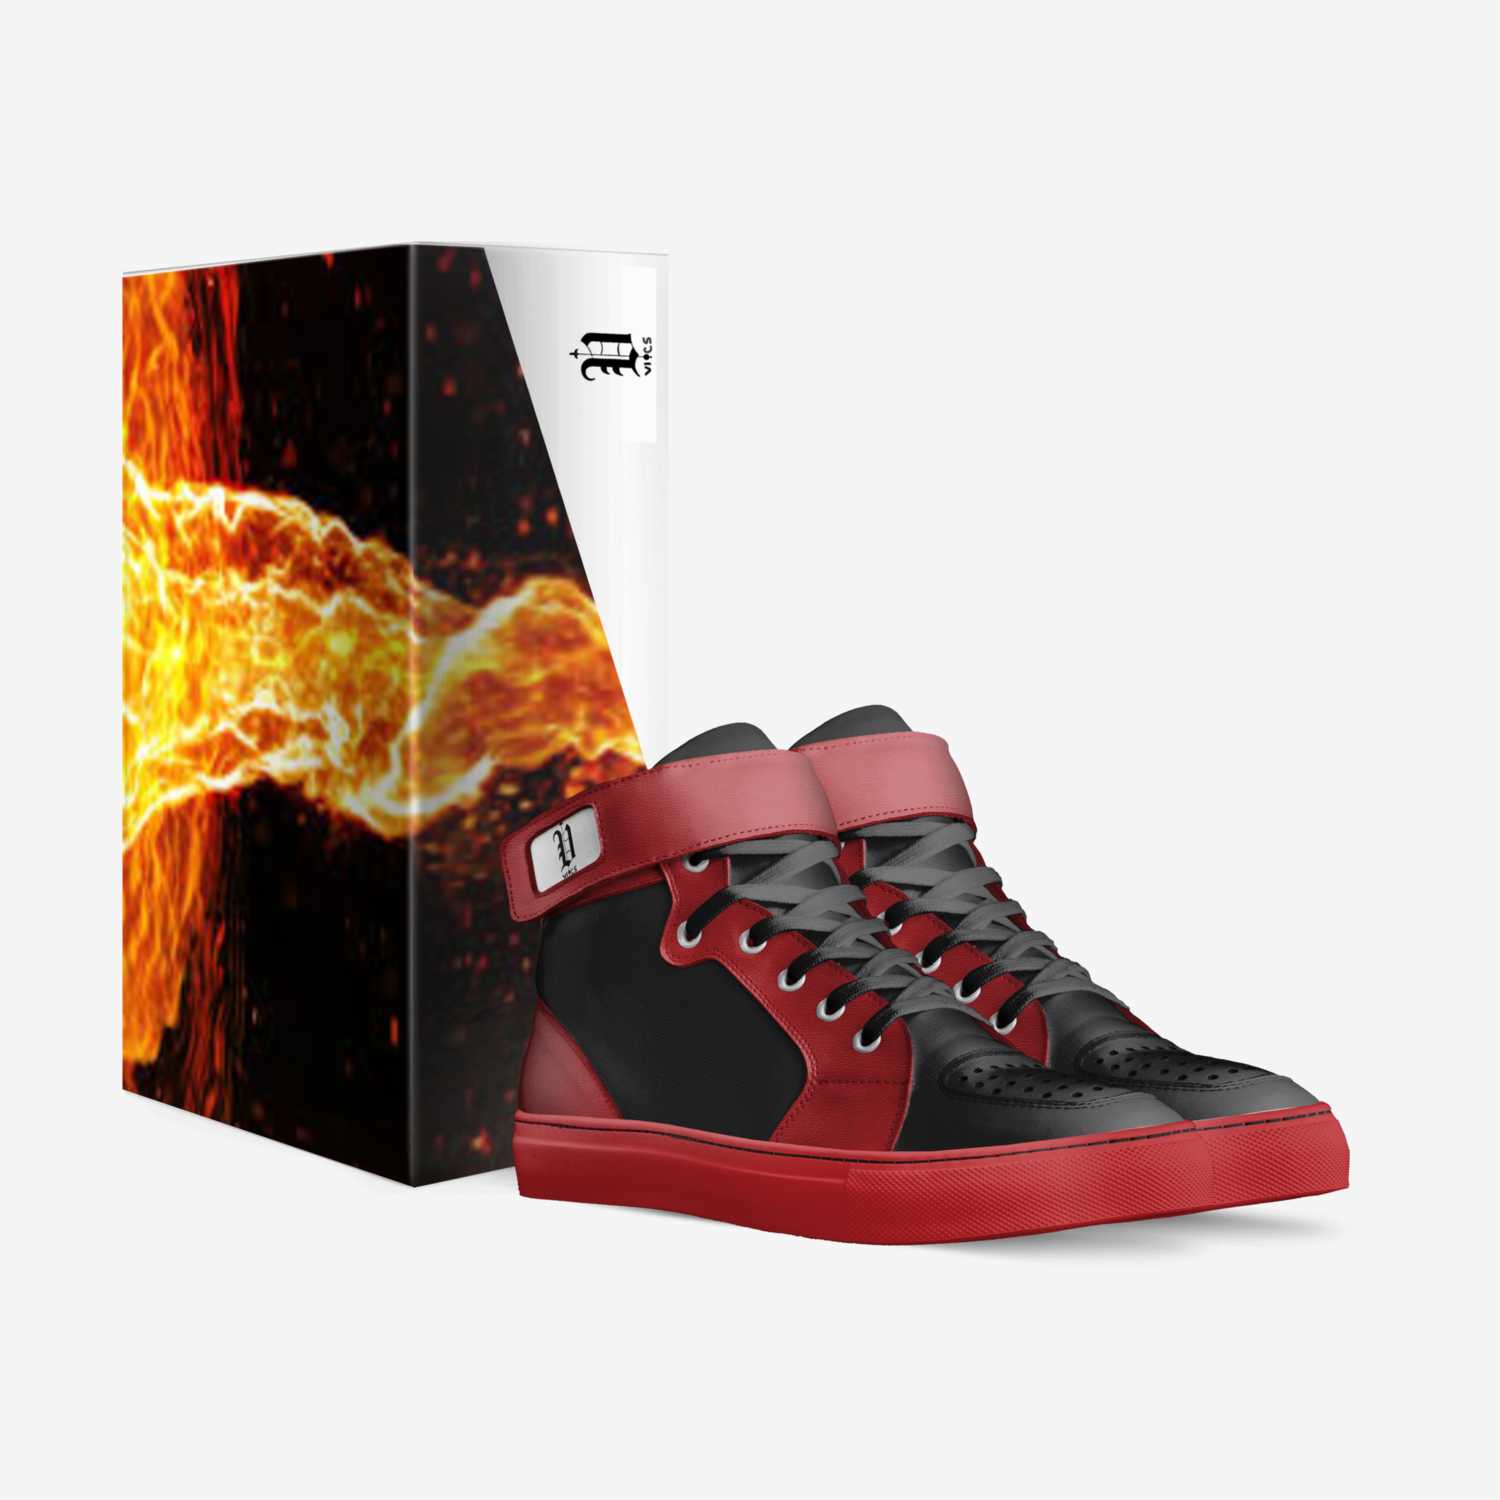 Vics tornado custom made in Italy shoes by Brayden Murphy | Box view